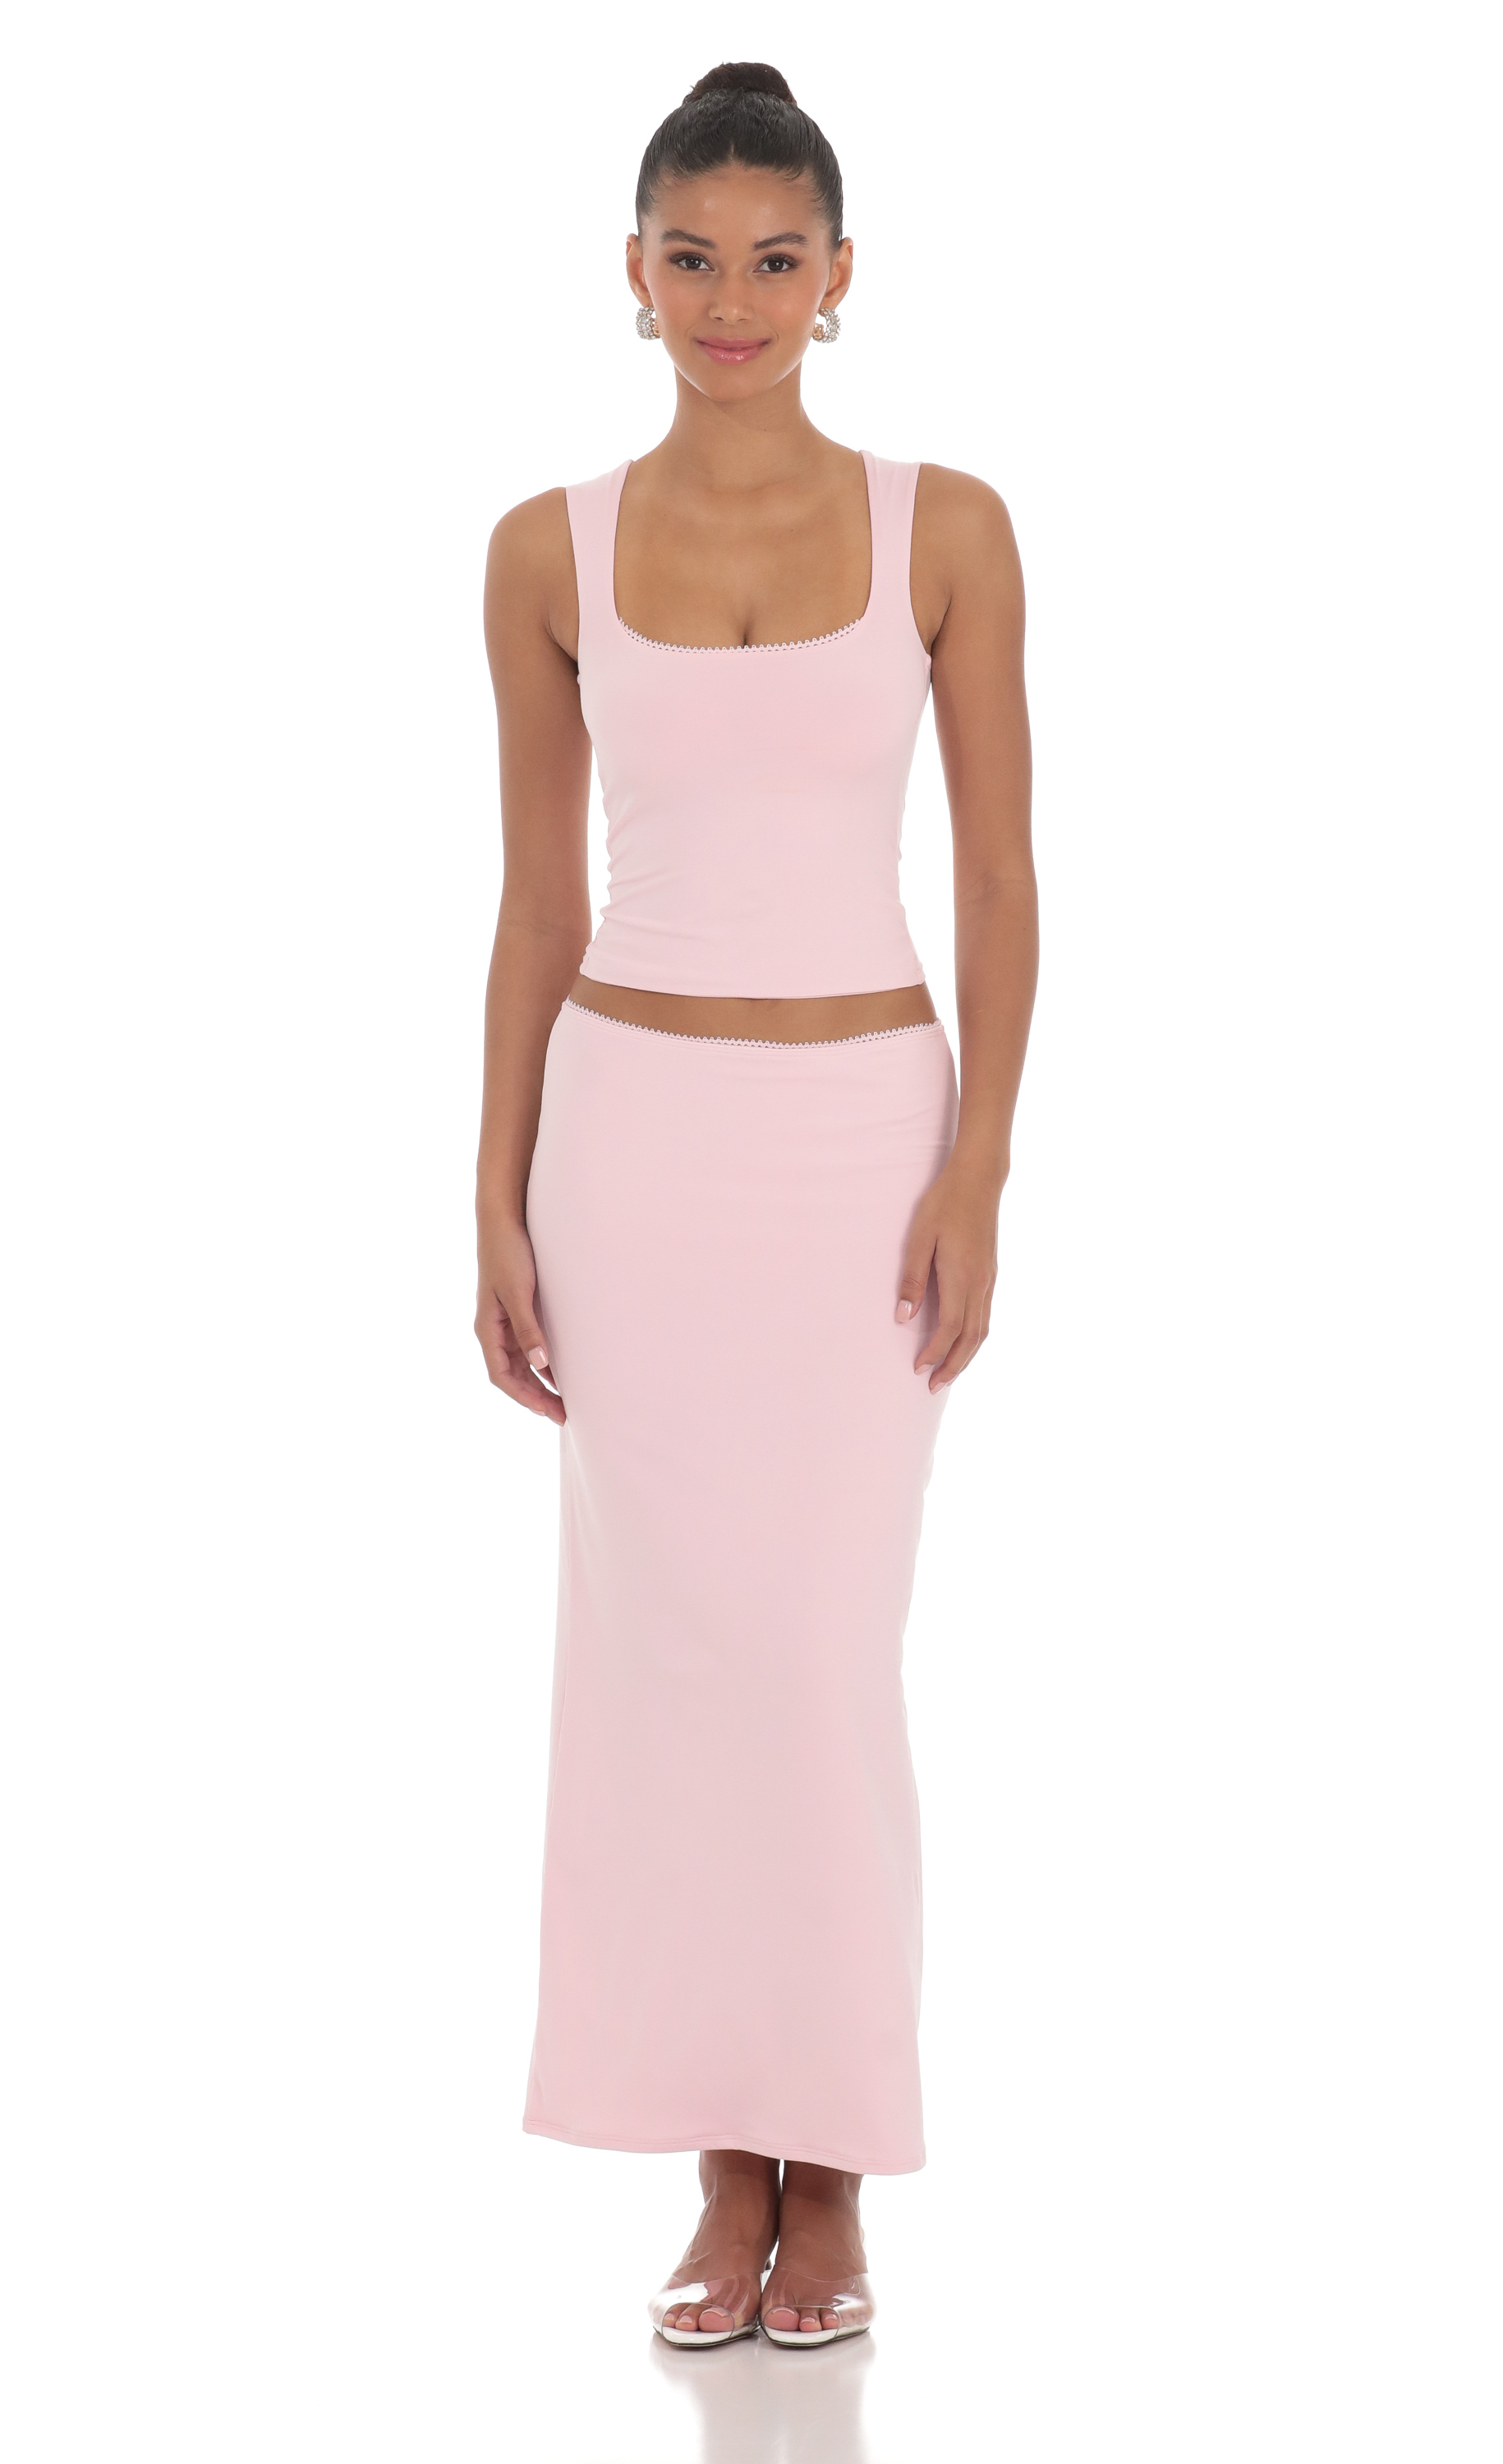 Two-Piece Set - Pink Outfit - Pants Set - $76.00 - Lulus